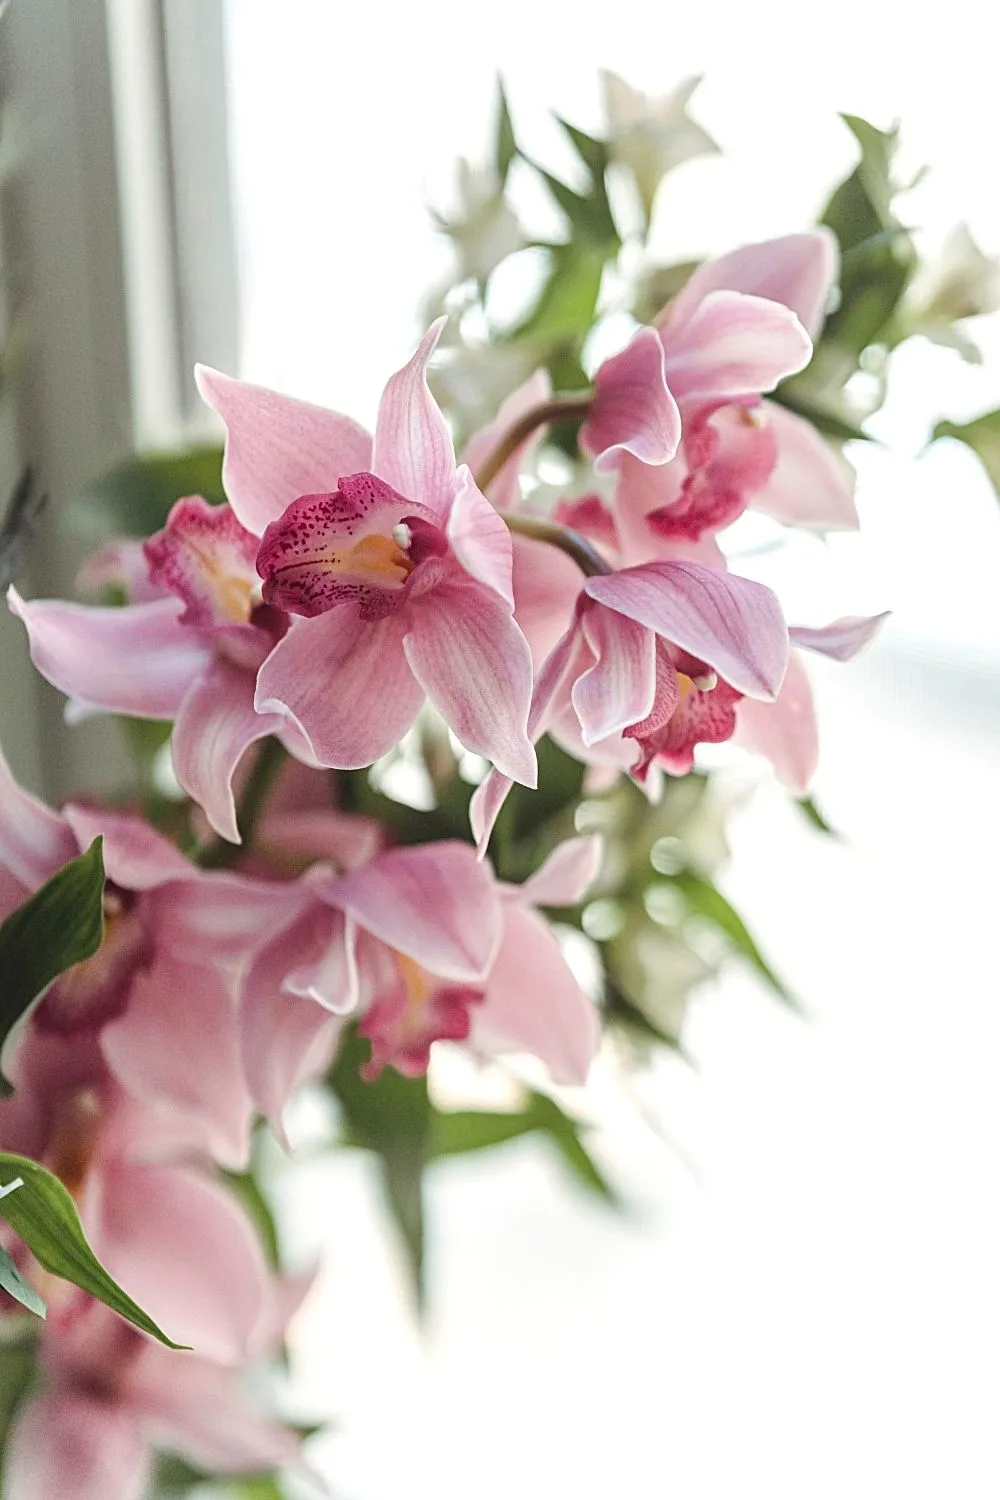 Moth orchid, which gets its name from the shape of its blooms, is another stunning plant to grow by your northeast-facing window